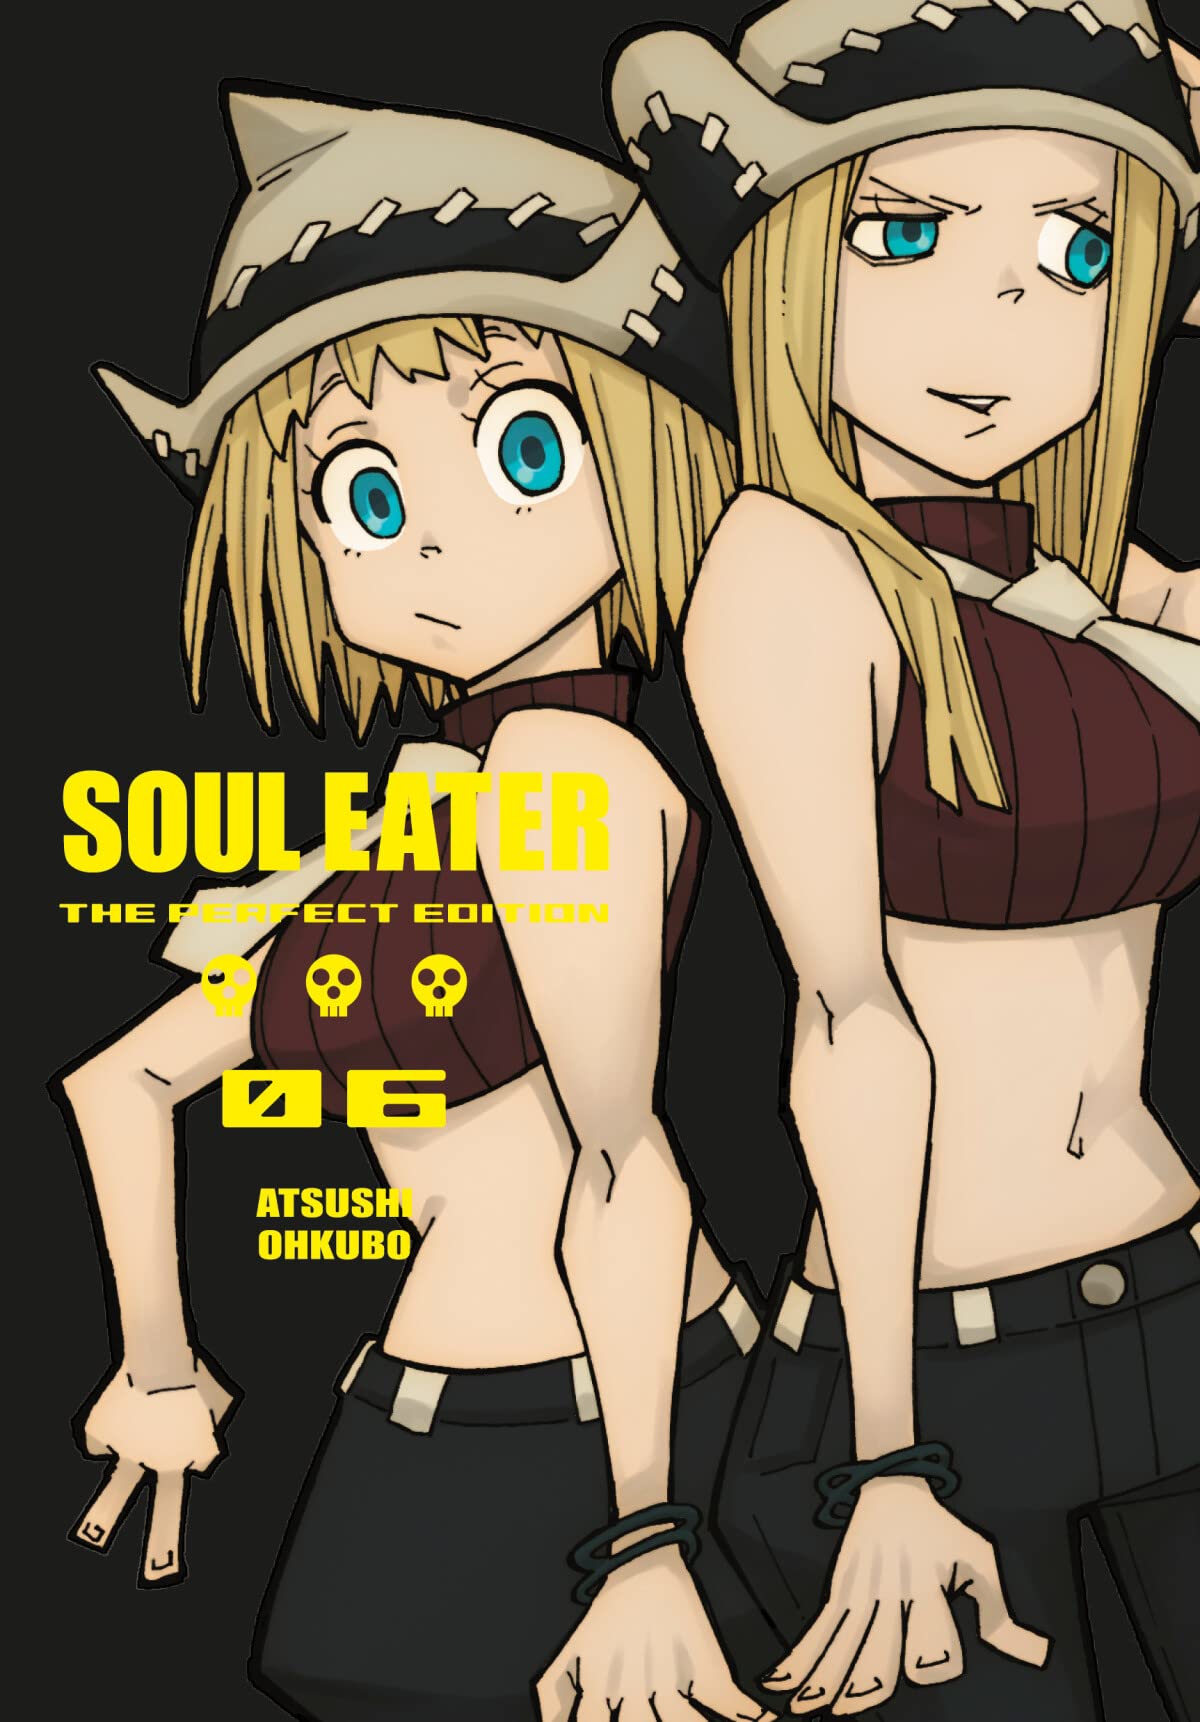 Soul Eater: The Perfect Edition Vol. 06